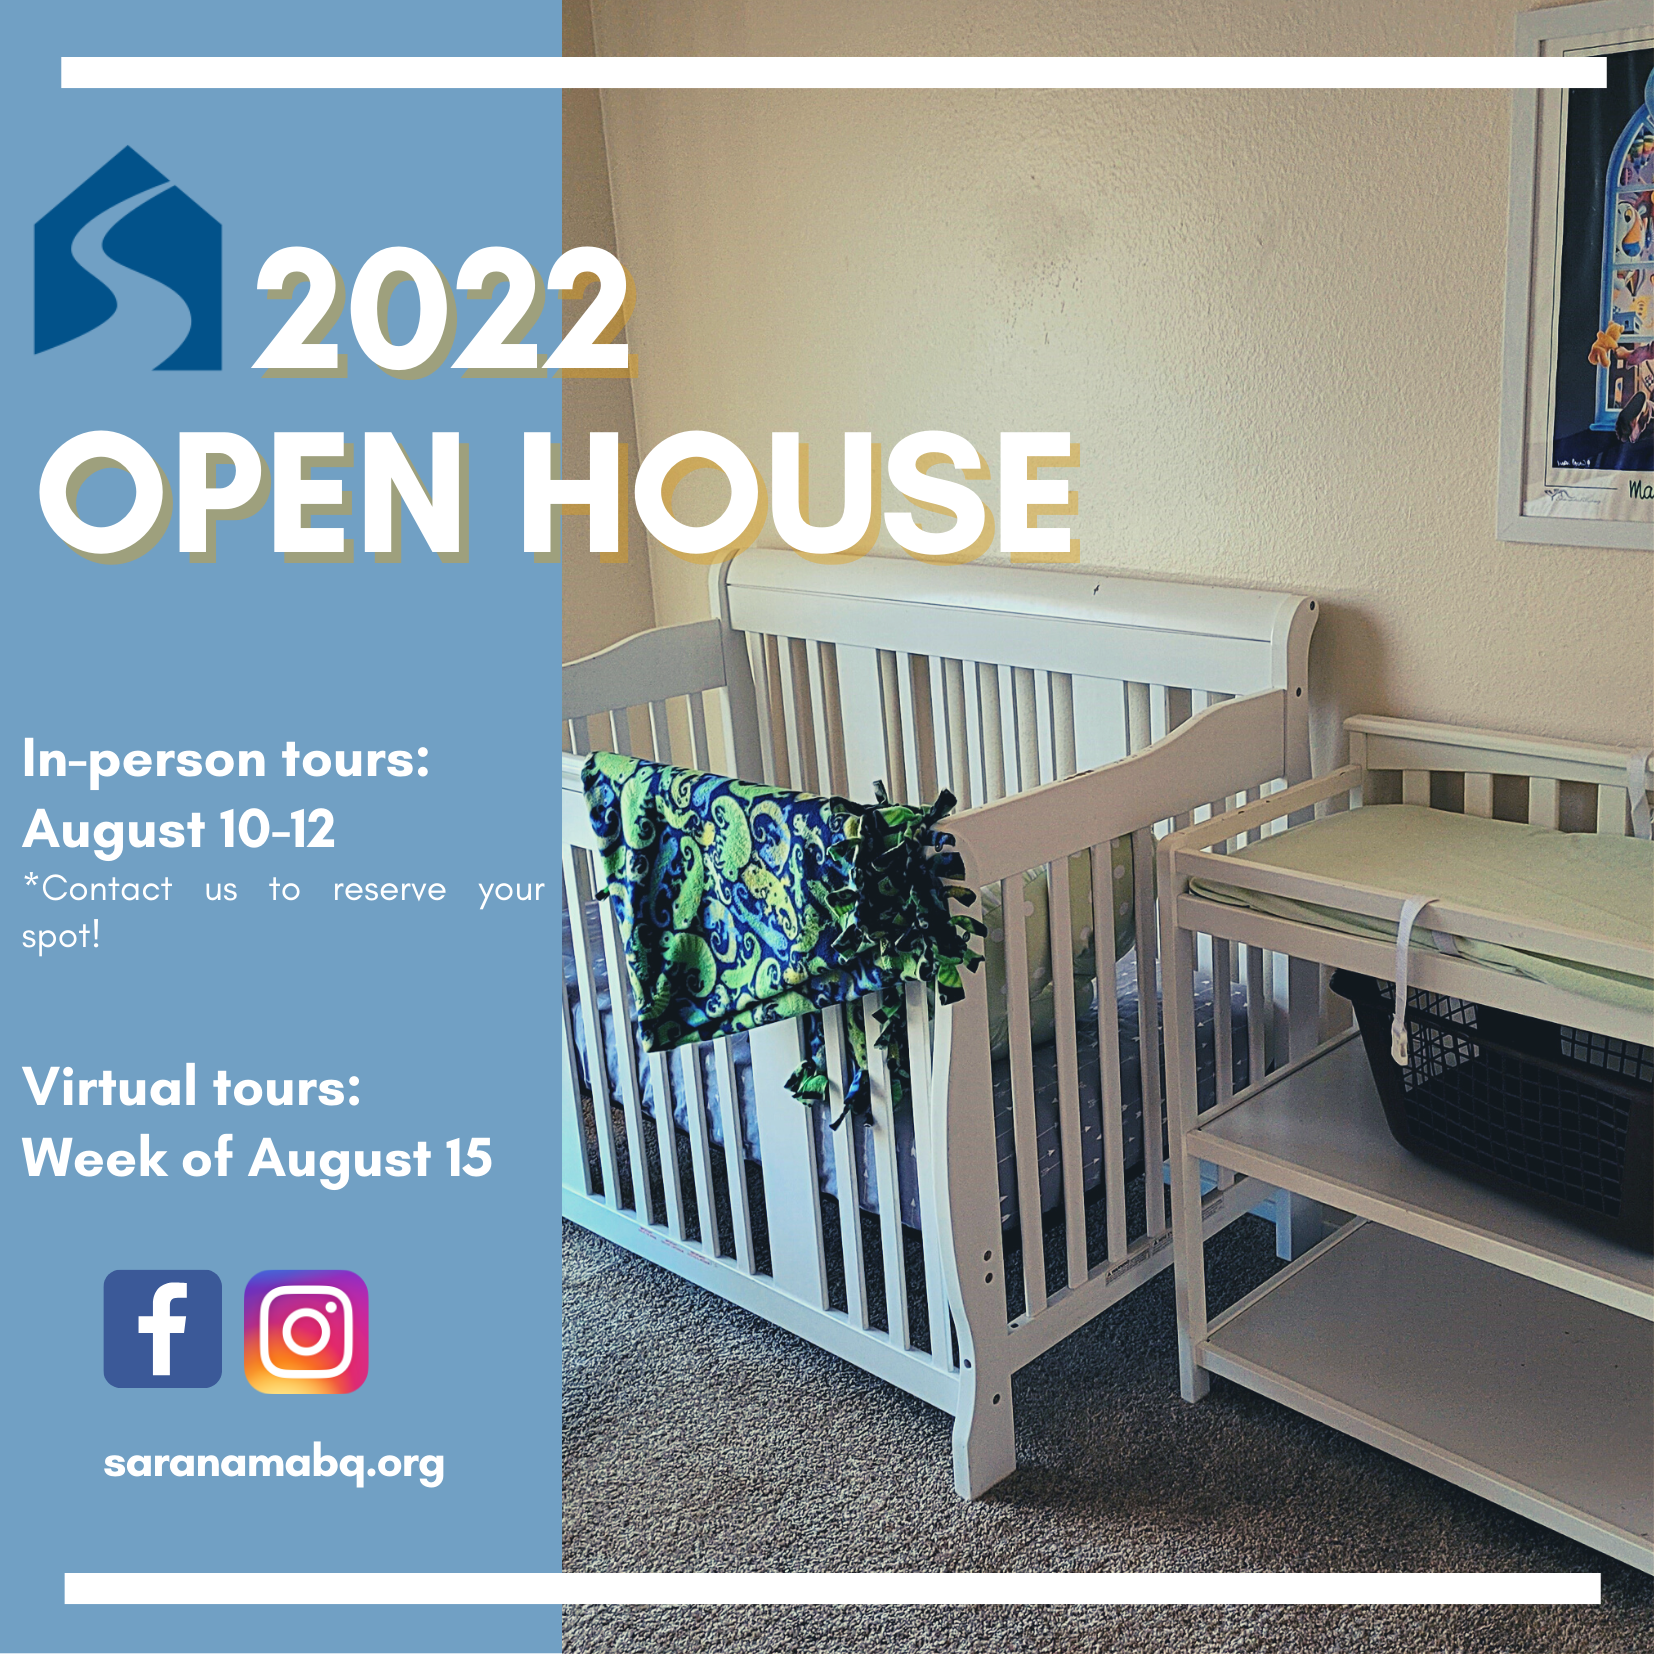 2022 open house image